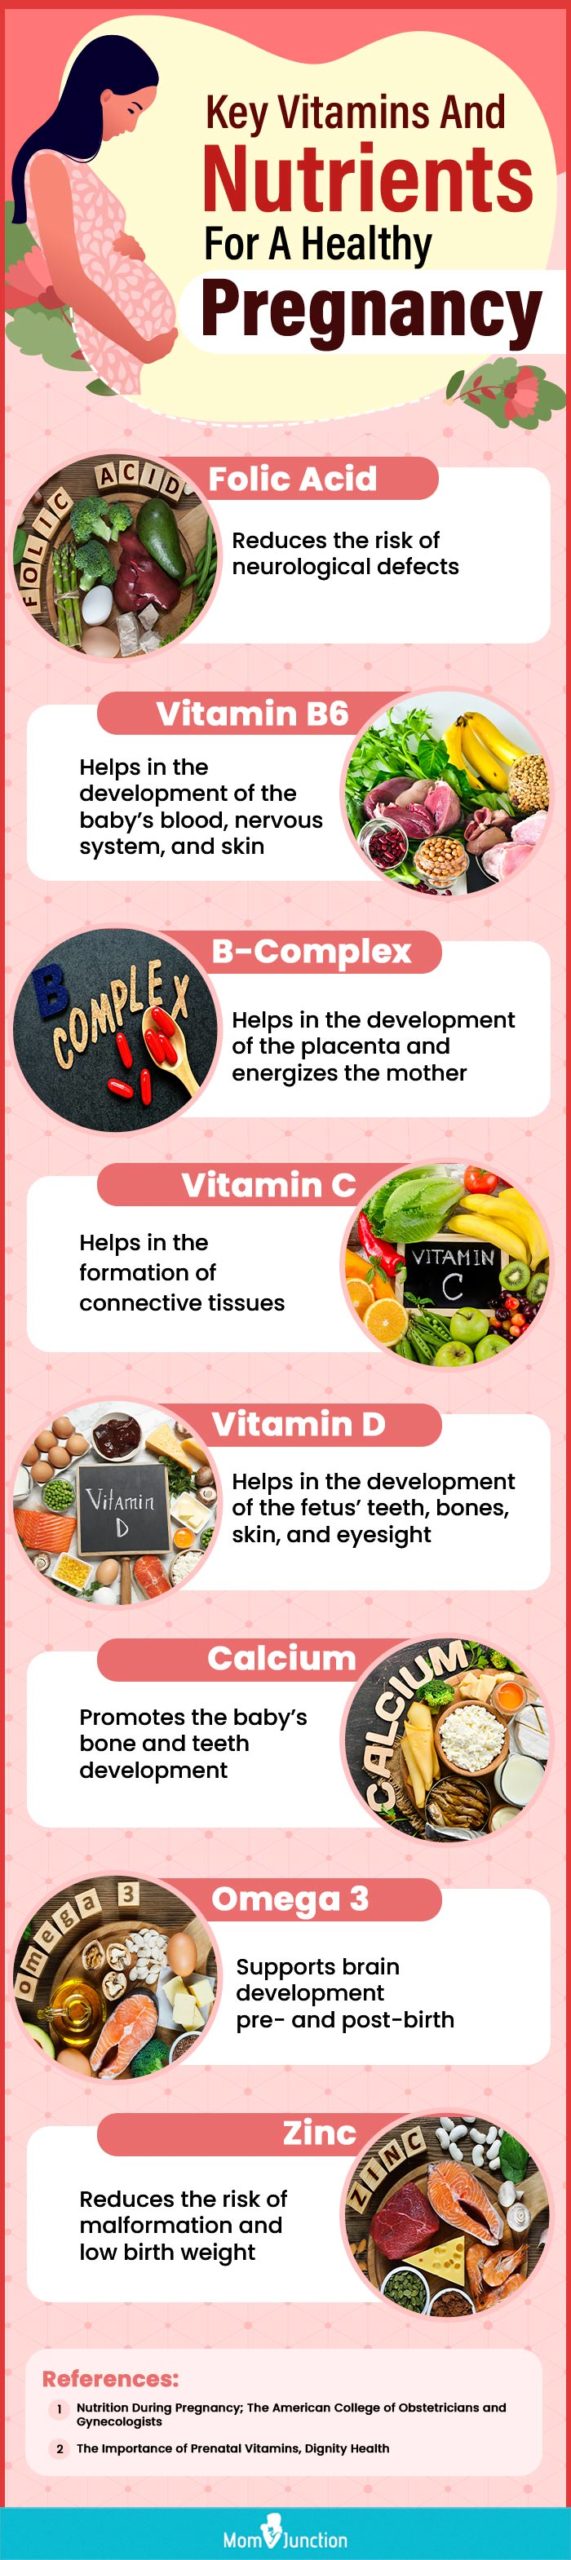 Key Vitamins And Nutrients For A Healthy Pregnancy (infographic) 